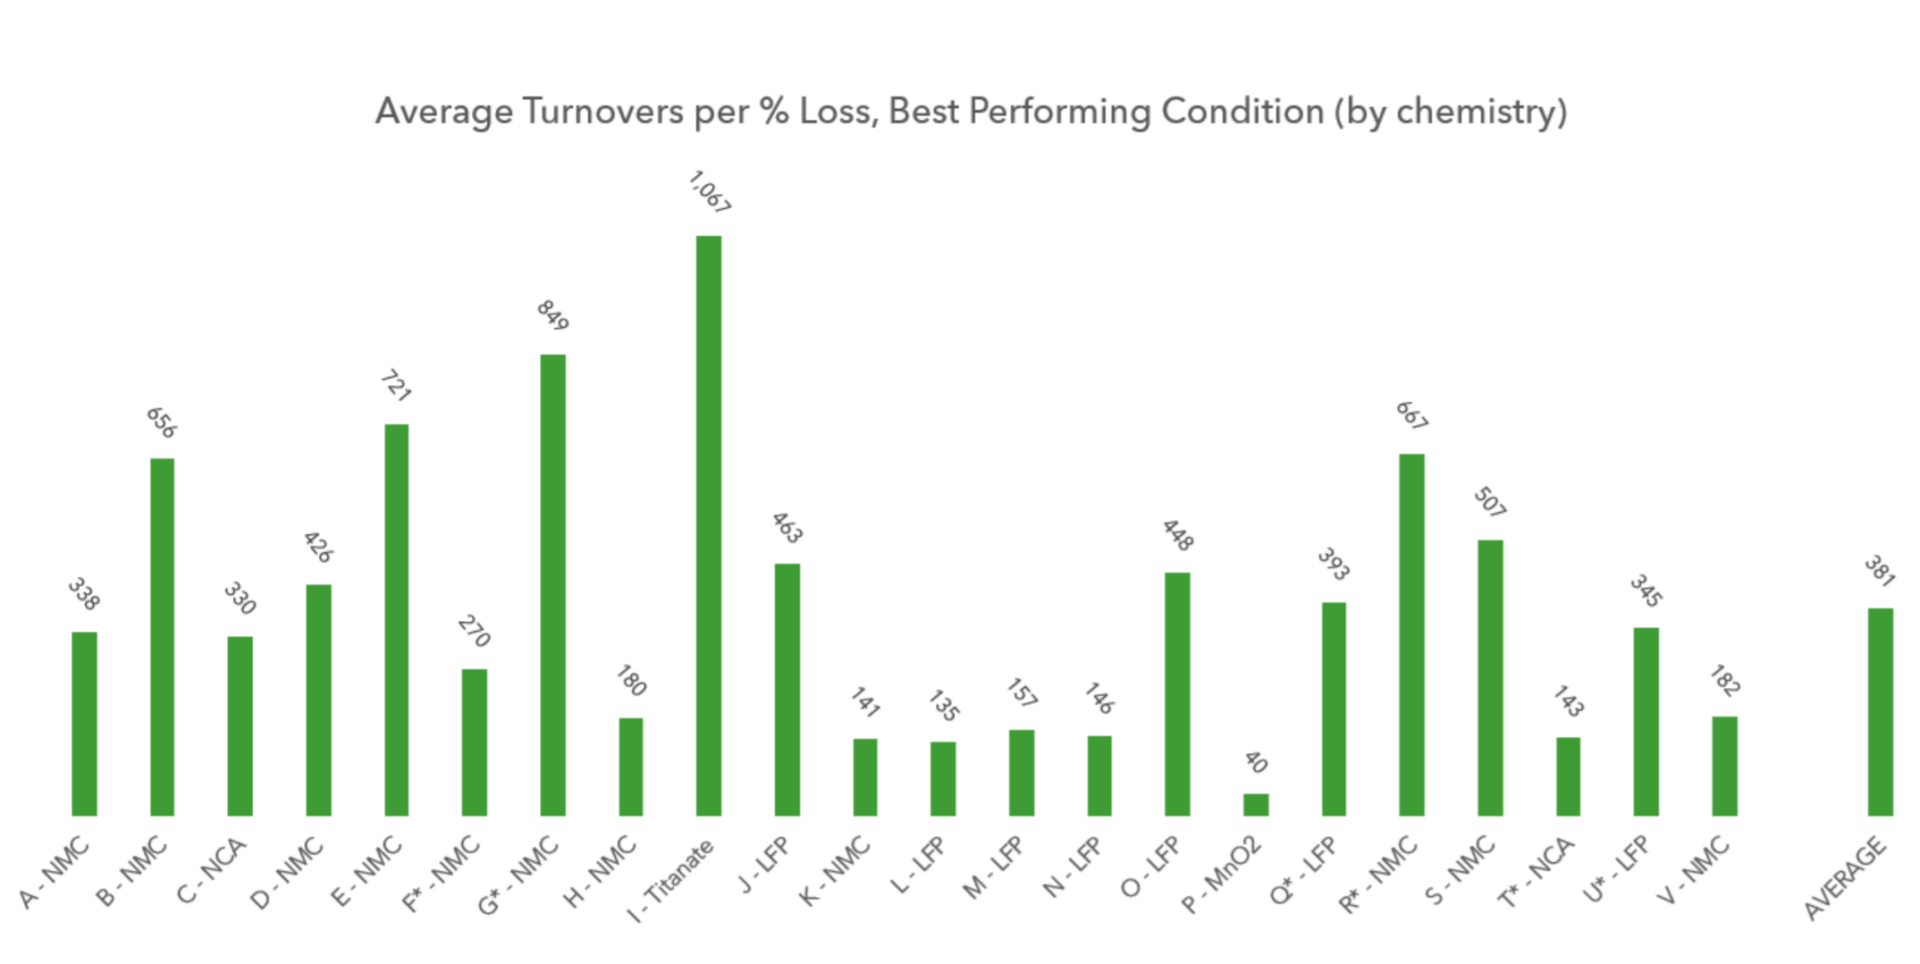 This chart shows the "Average Turnovers per Percent Loss. Average turnover is 381, best turnover batteries demonstrate 656-1067 turnovers, while some of the worst performing batteries are in a range of 40-182